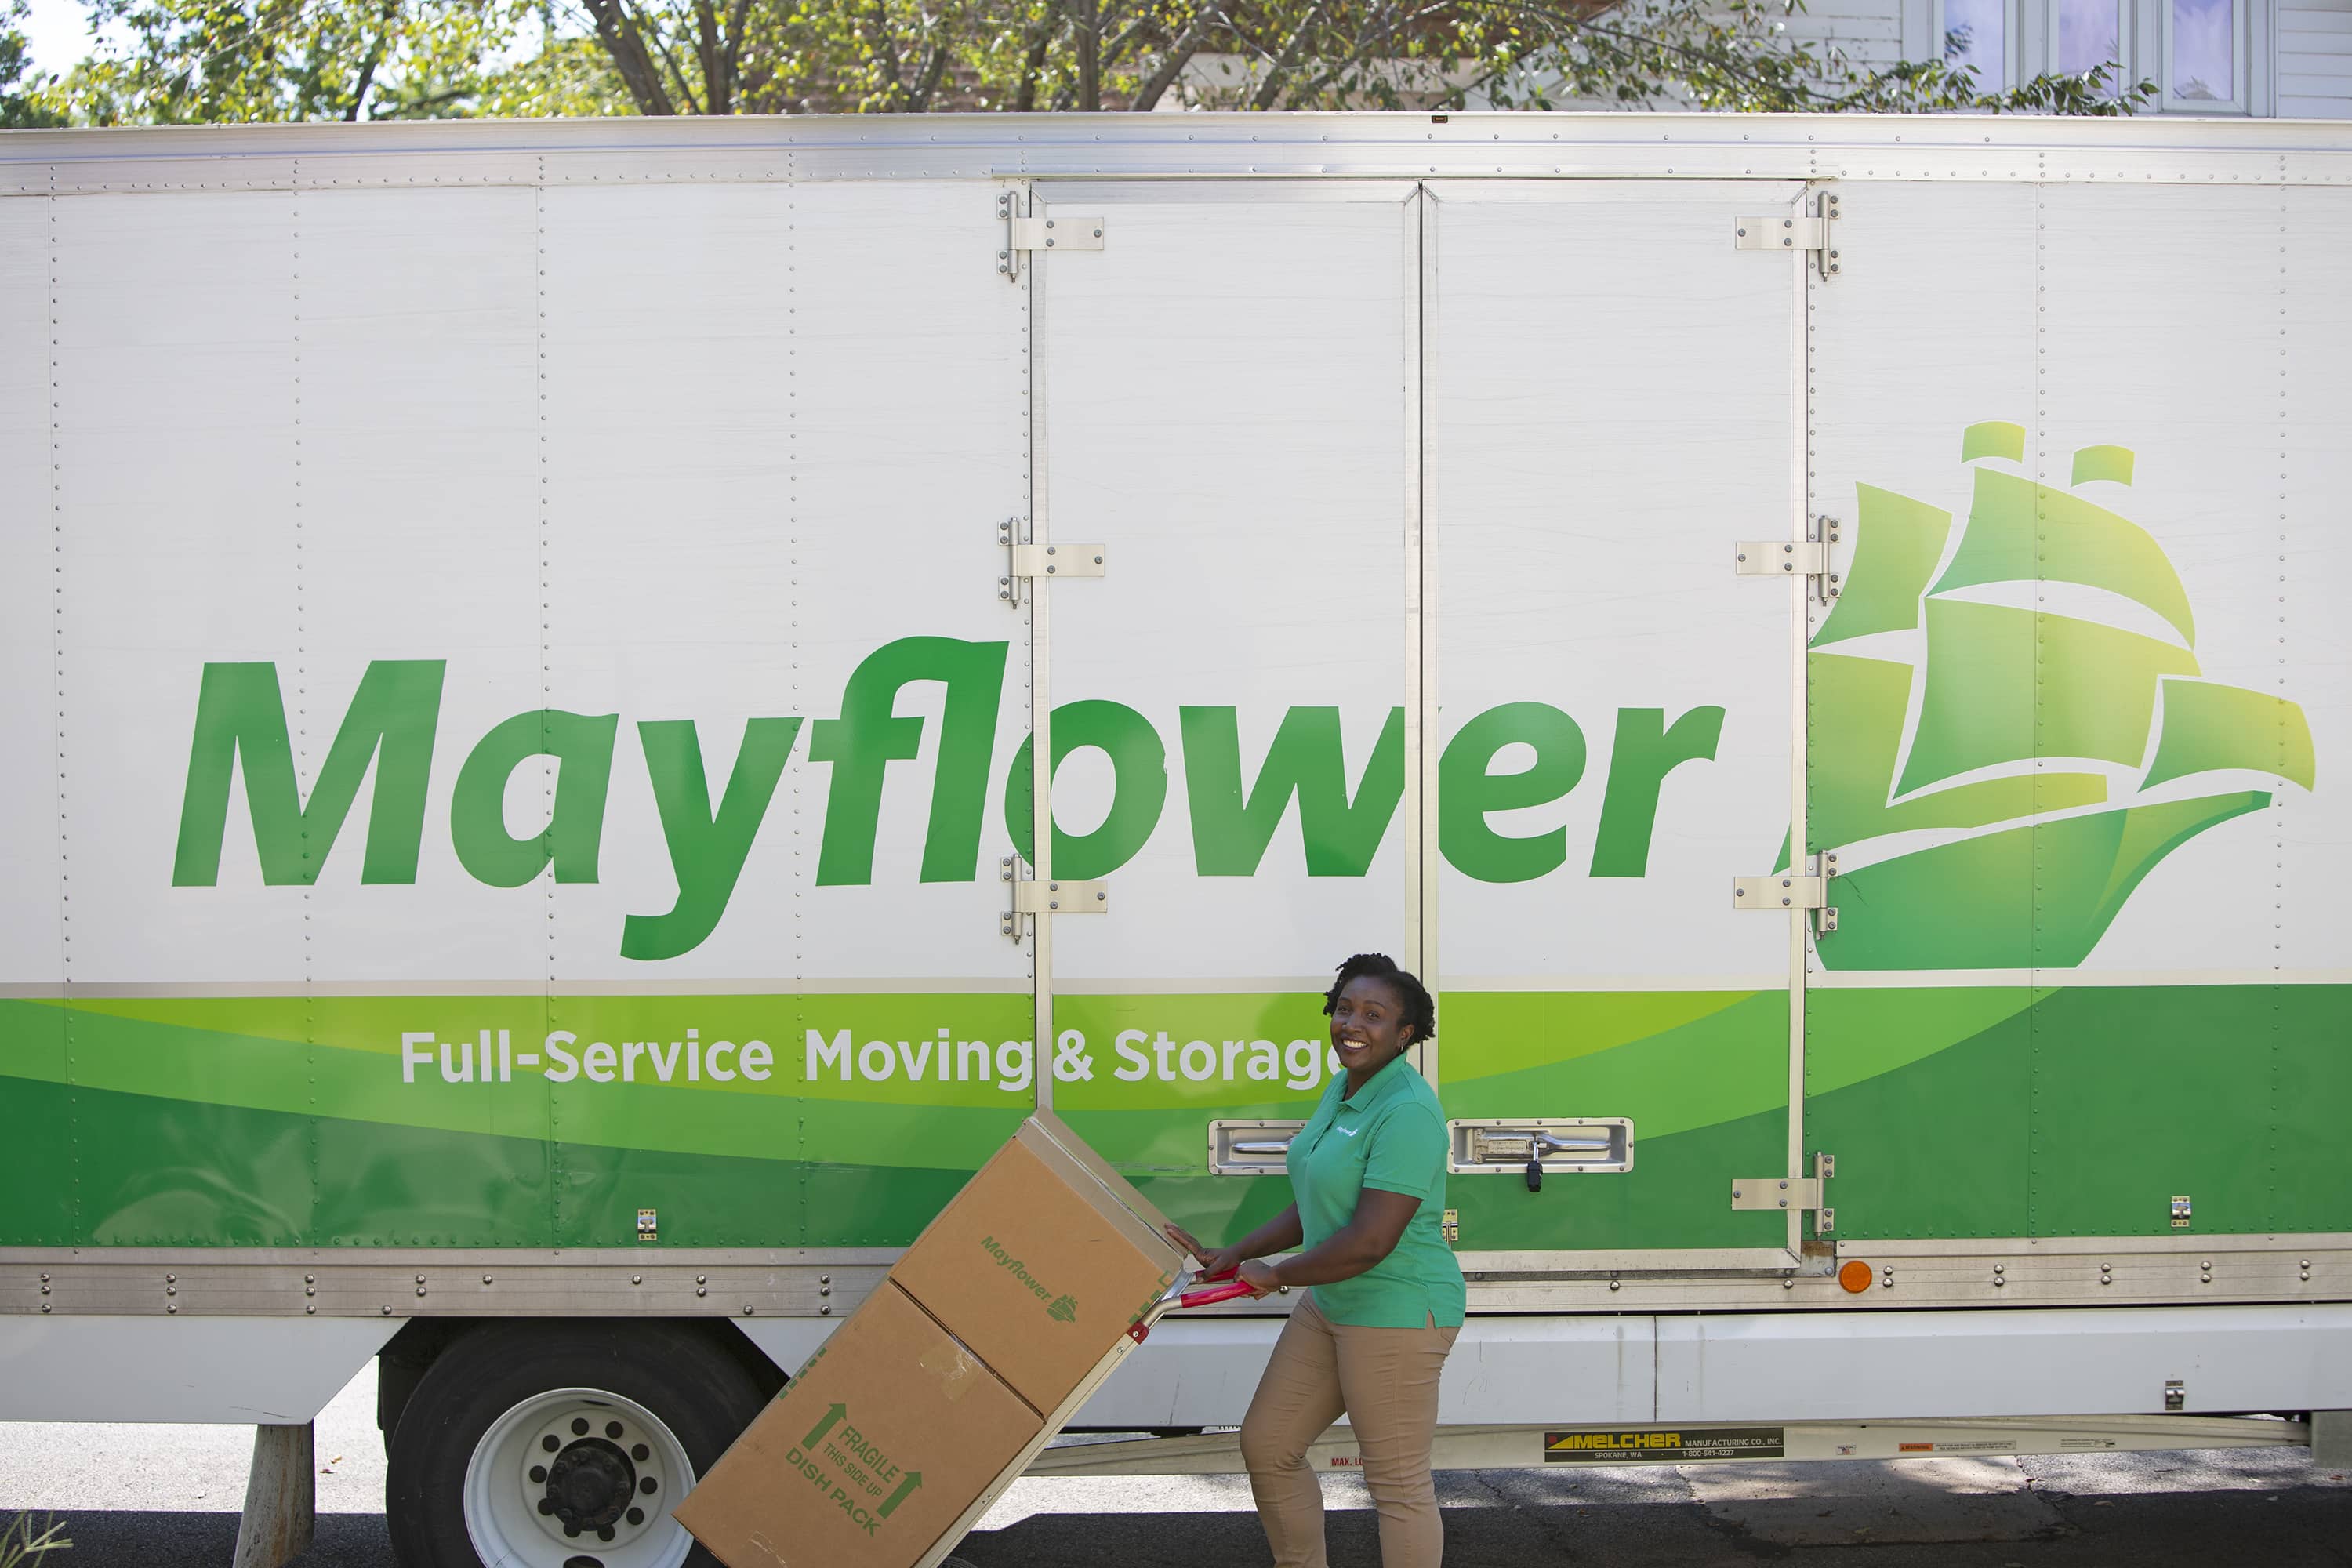 Estimate Your Moving Costs - Mayflower mover transporting moving boxes from a Mayflower moving truck - Mayflower